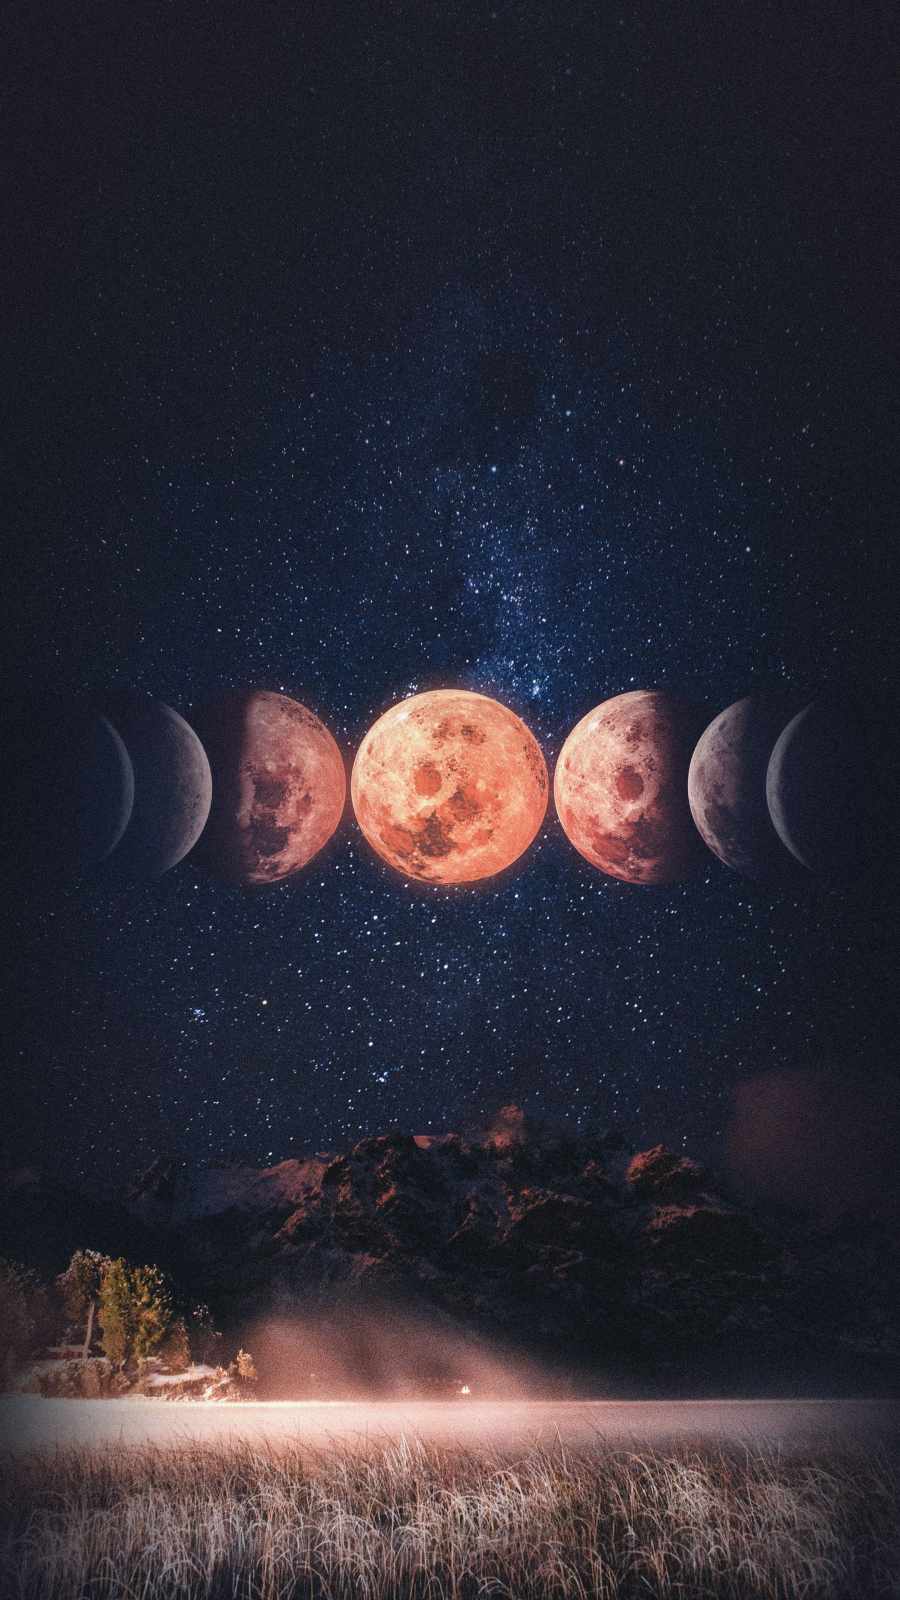 Moon Phases Wallpaper is free iPhone wallpaper